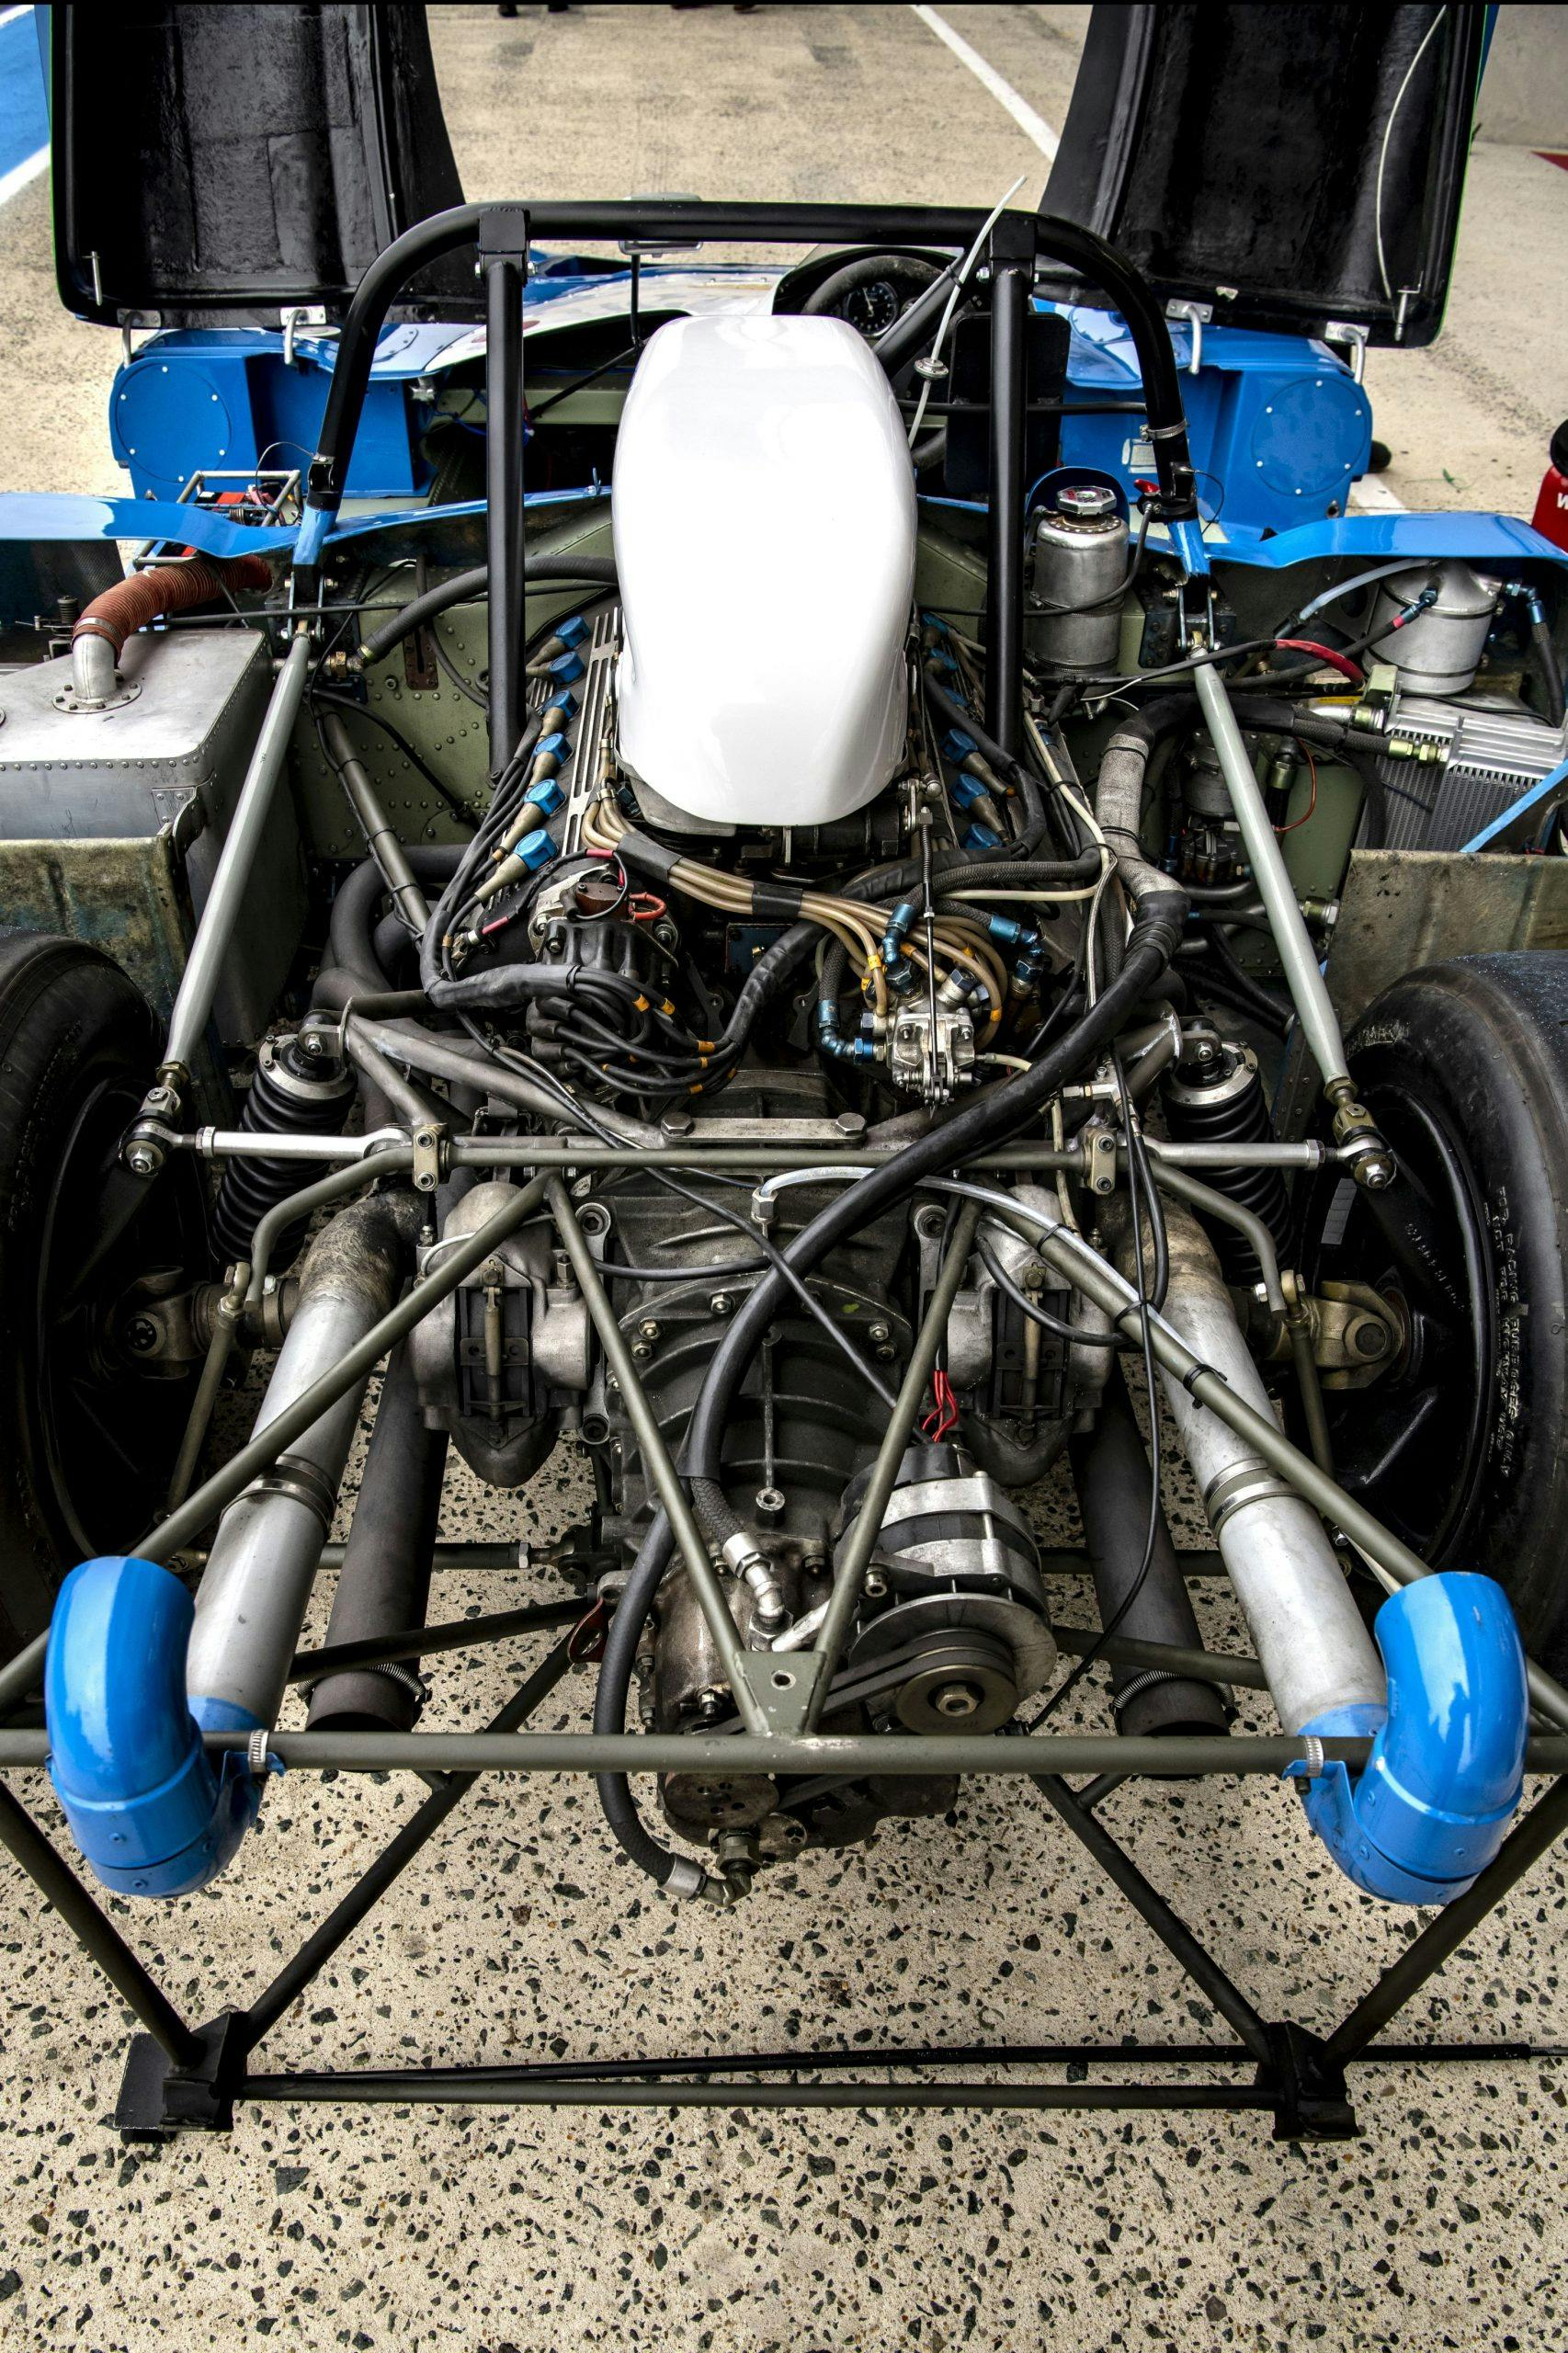 1972 Matra MS 670 rear engine chassis